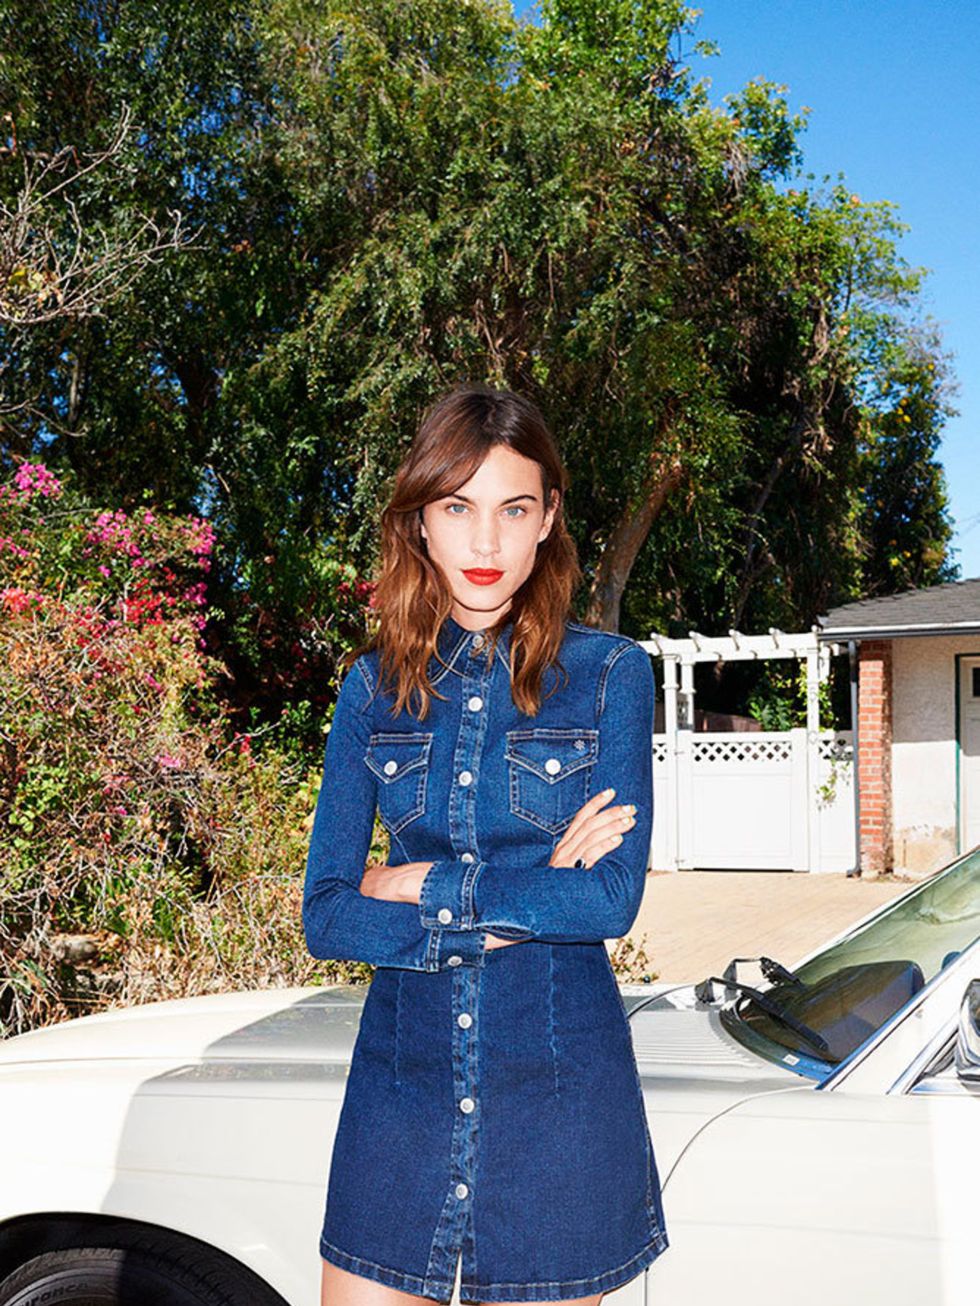 <p>Alexa Chung for <a href="http://www.elleuk.com/fashion/news/alexa-chung-designs-for-ag-denim-collection-adriano-goldschmied">AG jeans</a>.</p>